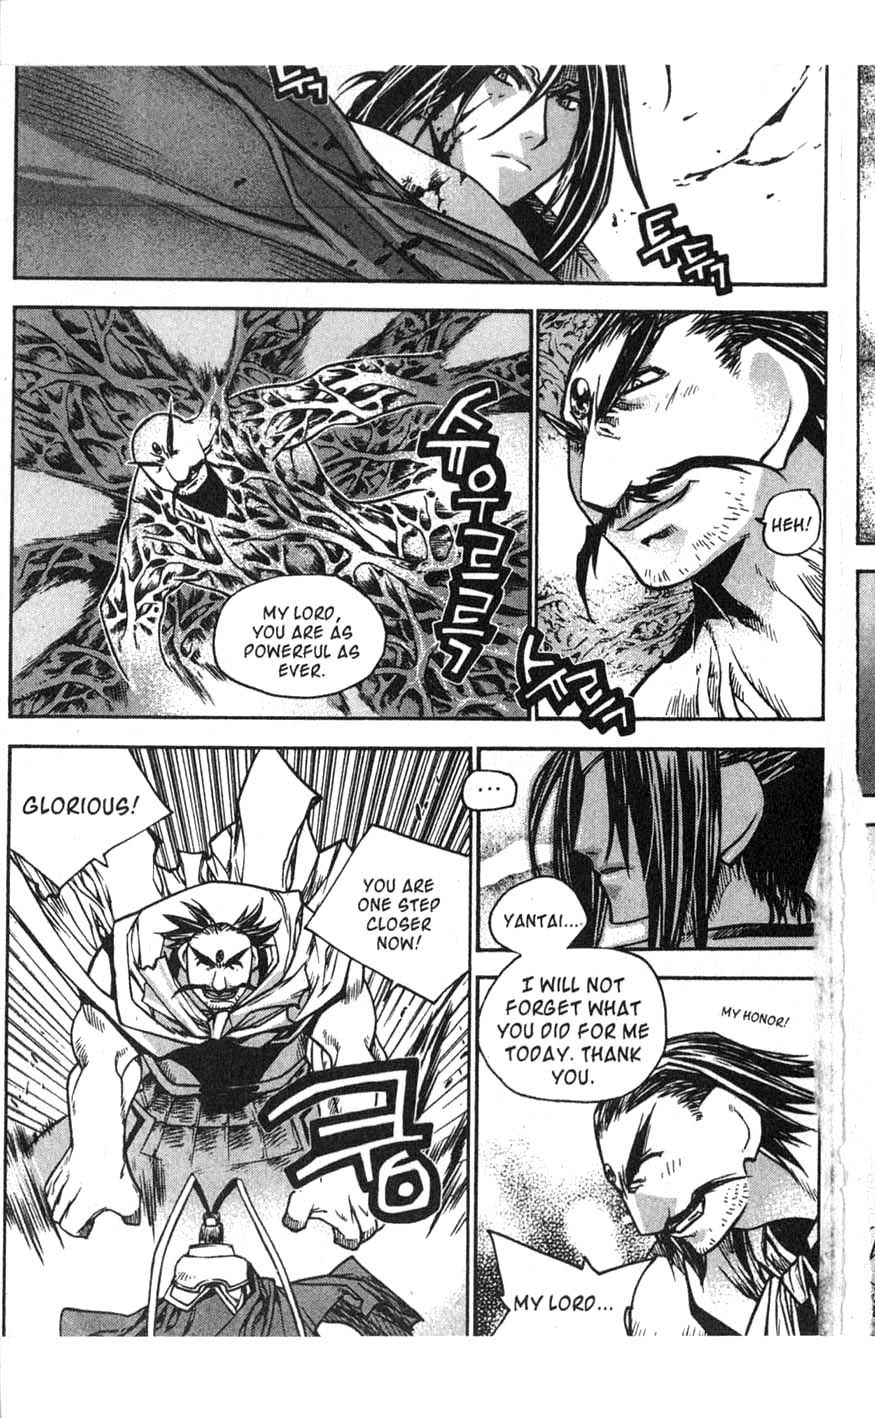 Chronicles of the Cursed Sword Vol. 16 Ch. 66 The Sage's Last Stand?!